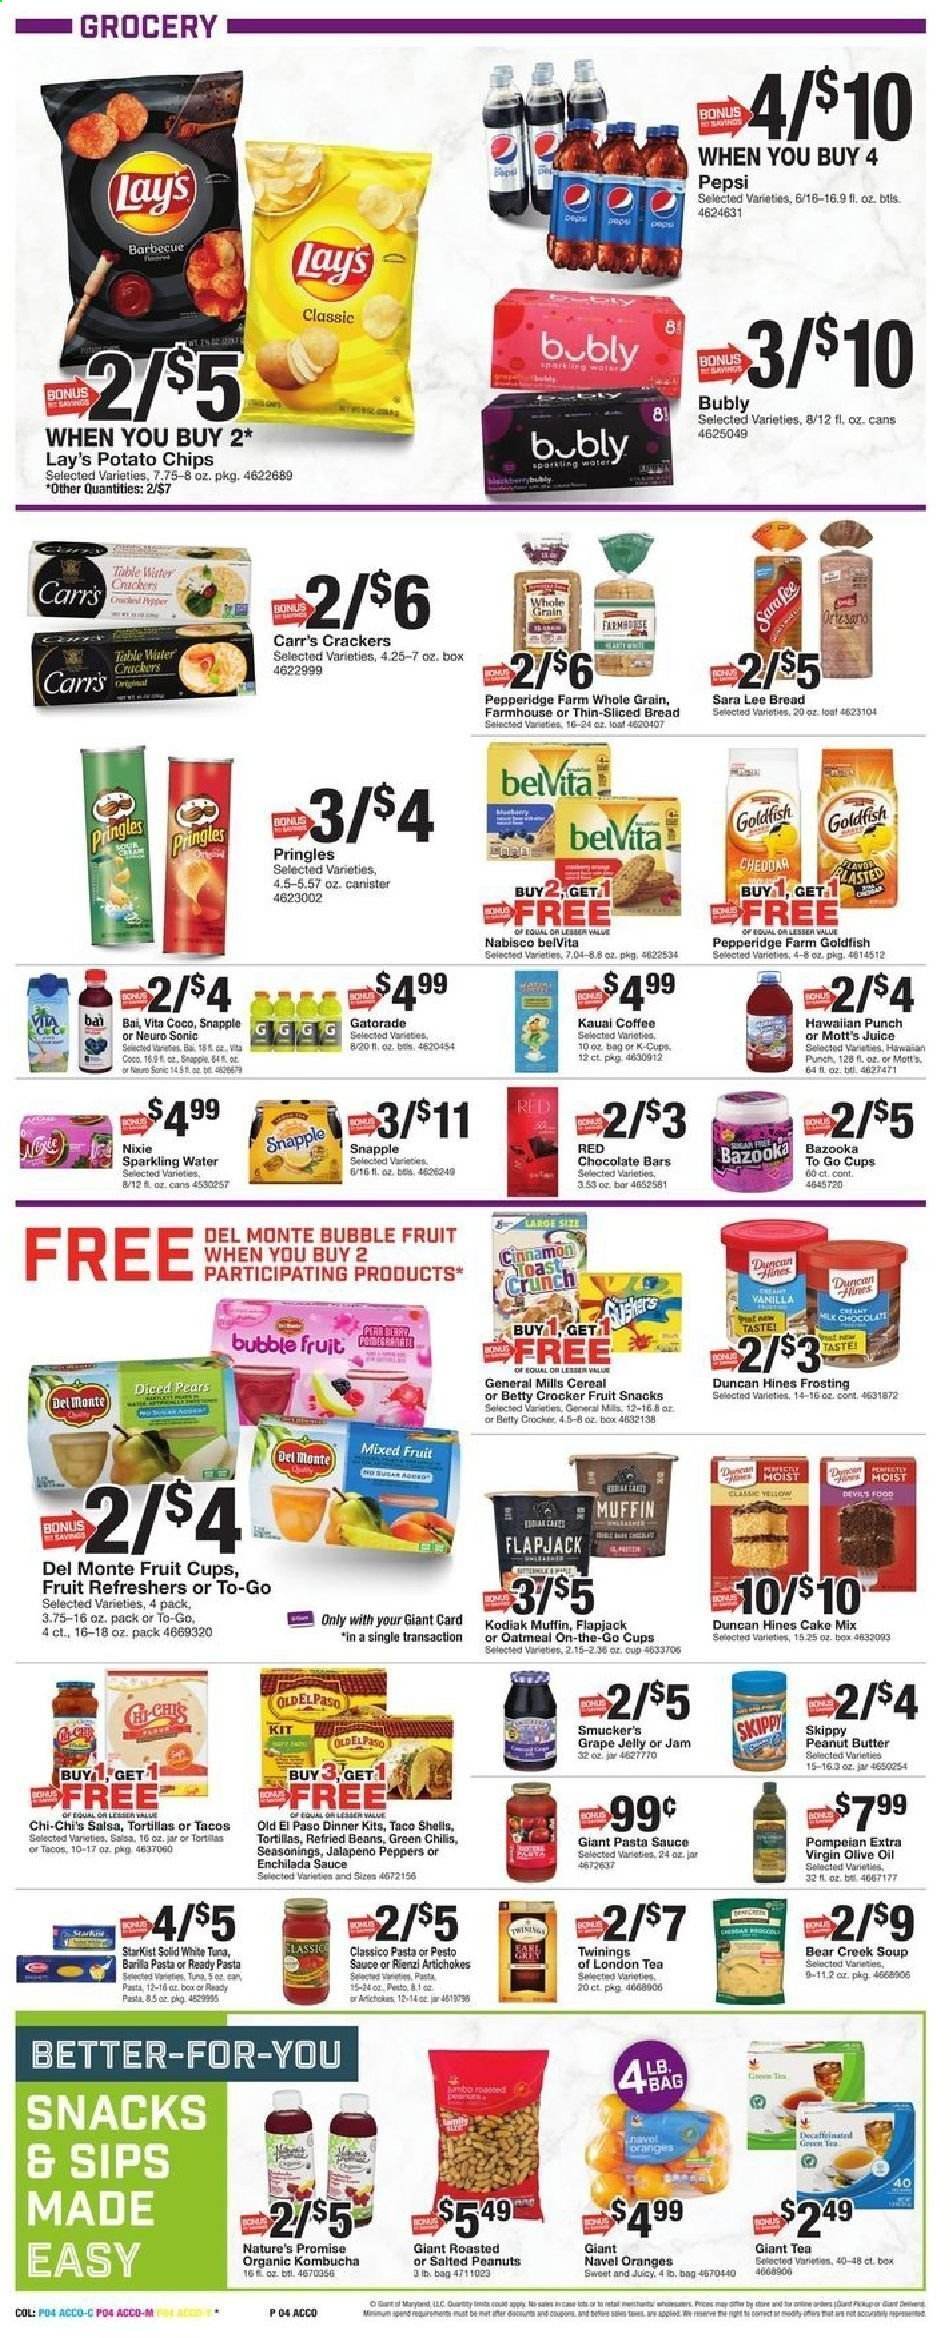 thumbnail - Giant Food Flyer - 01/15/2021 - 01/21/2021 - Sales products - fruit cup, bread, tortillas, Old El Paso, toast bread, Nature’s Promise, tacos, Sara Lee, cake mix, muffin, pears, oranges, StarKist, enchiladas, soup, dinner kit, Barilla, jelly, salsa, beans, chocolate, crackers, fruit snack, potato chips, Pringles, chips, Lay’s, Goldfish, frosting, oatmeal, enchilada sauce, refried beans, jalapeño, cereals, belVita, cinnamon, pesto, pasta sauce, extra virgin olive oil, olive oil, grape jelly, fruit jam, peanut butter, Pepsi, juice, Snapple, Bai, Mott's, Gatorade, sparkling water, kombucha, green tea, tea, Twinings, coffee, coffee capsules, K-Cups. Page 4.